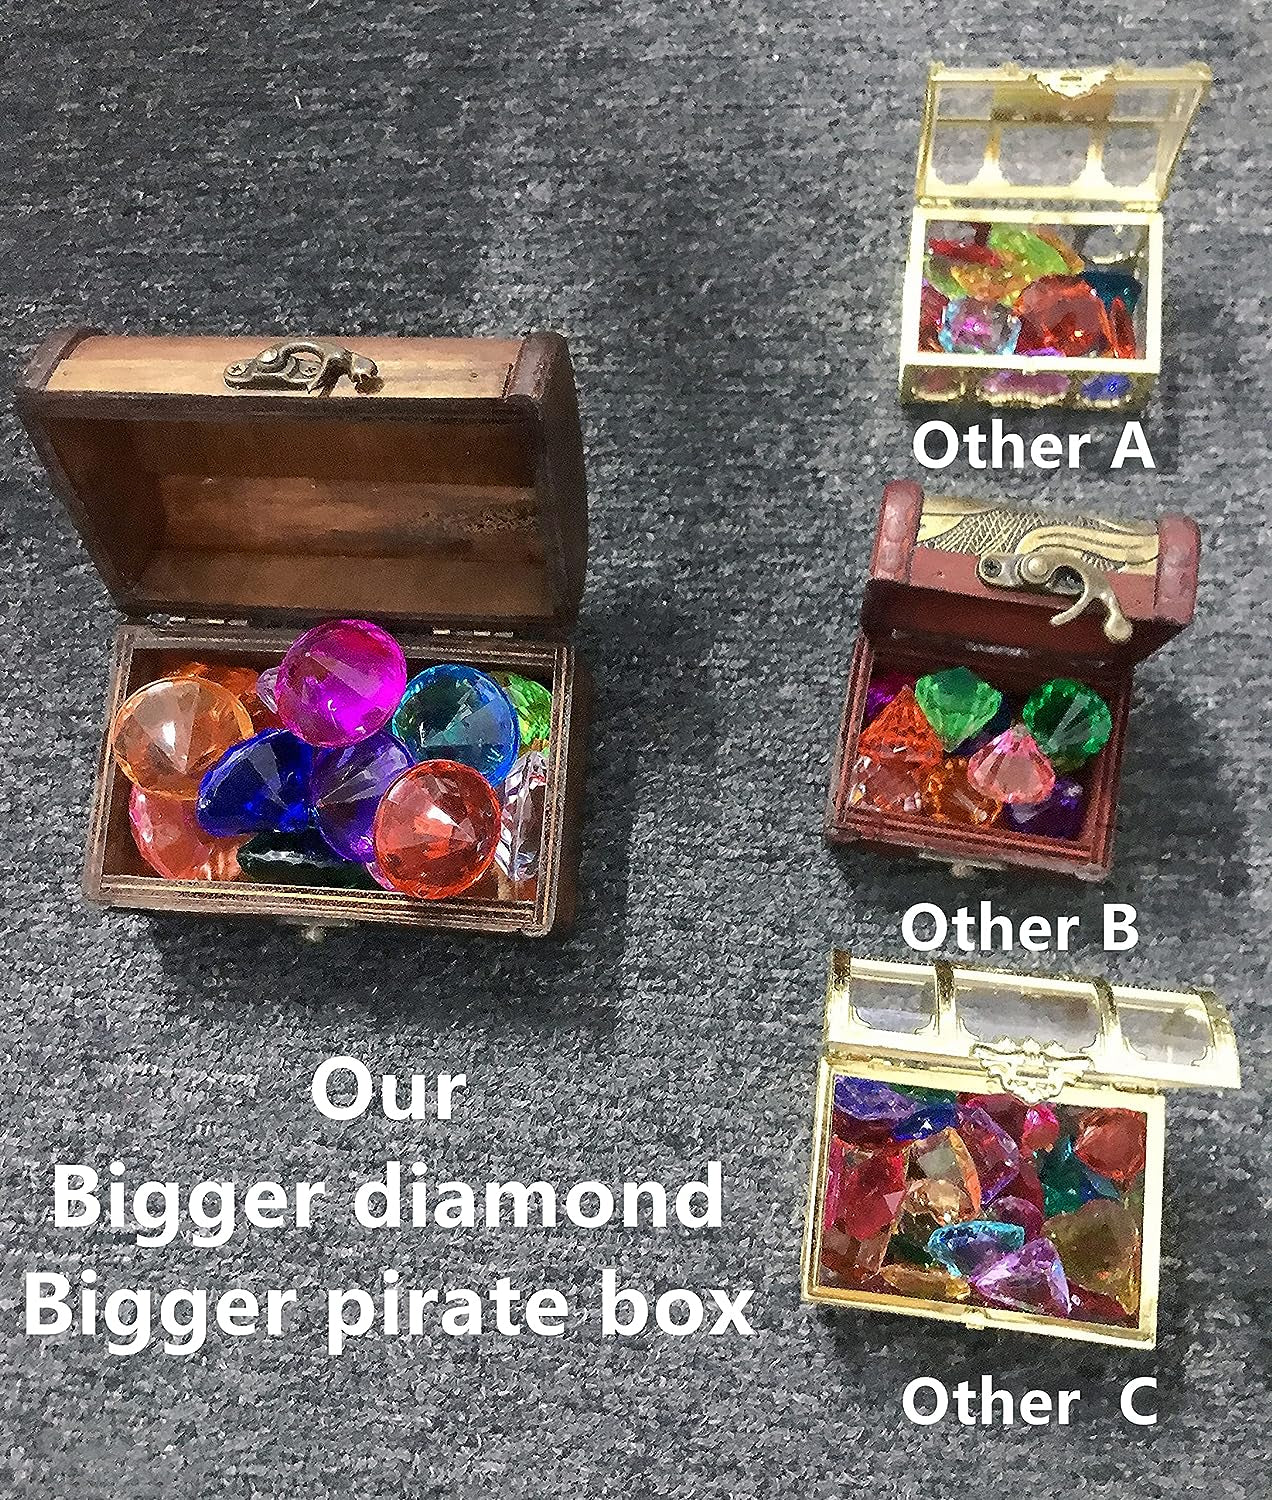 Diving Gem Pool Toy 15 Big Colorful Diamond Set with Big Treasure Chest Pirate Box Underwater Gem Diving Dive Throw Toy Set Swimming Training Gift Toy